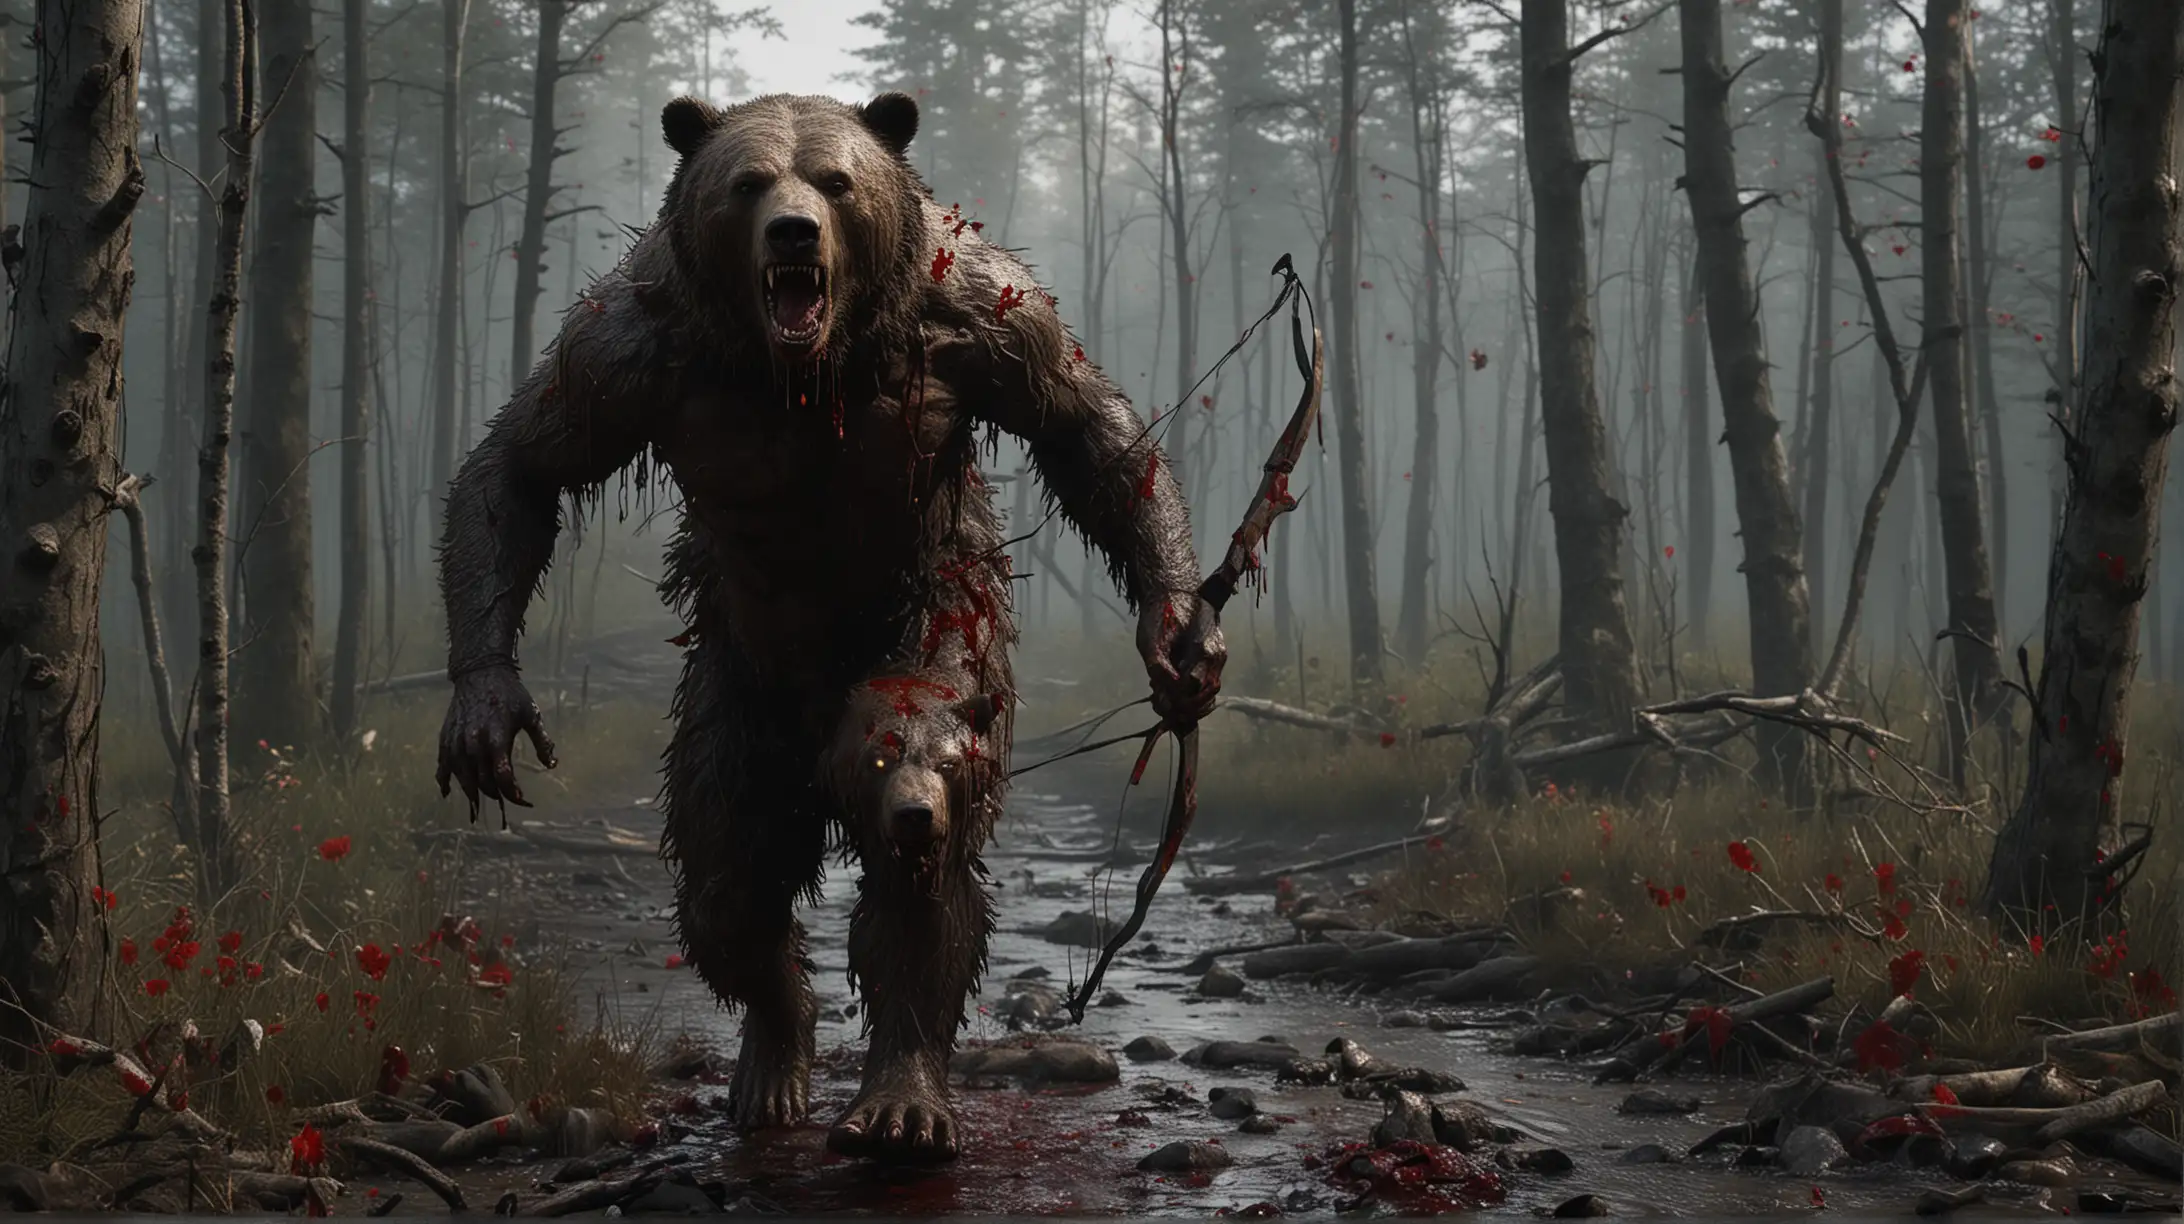 Fearful Man Running from Bear Covered in Blood in Muddy Forest at Dawn